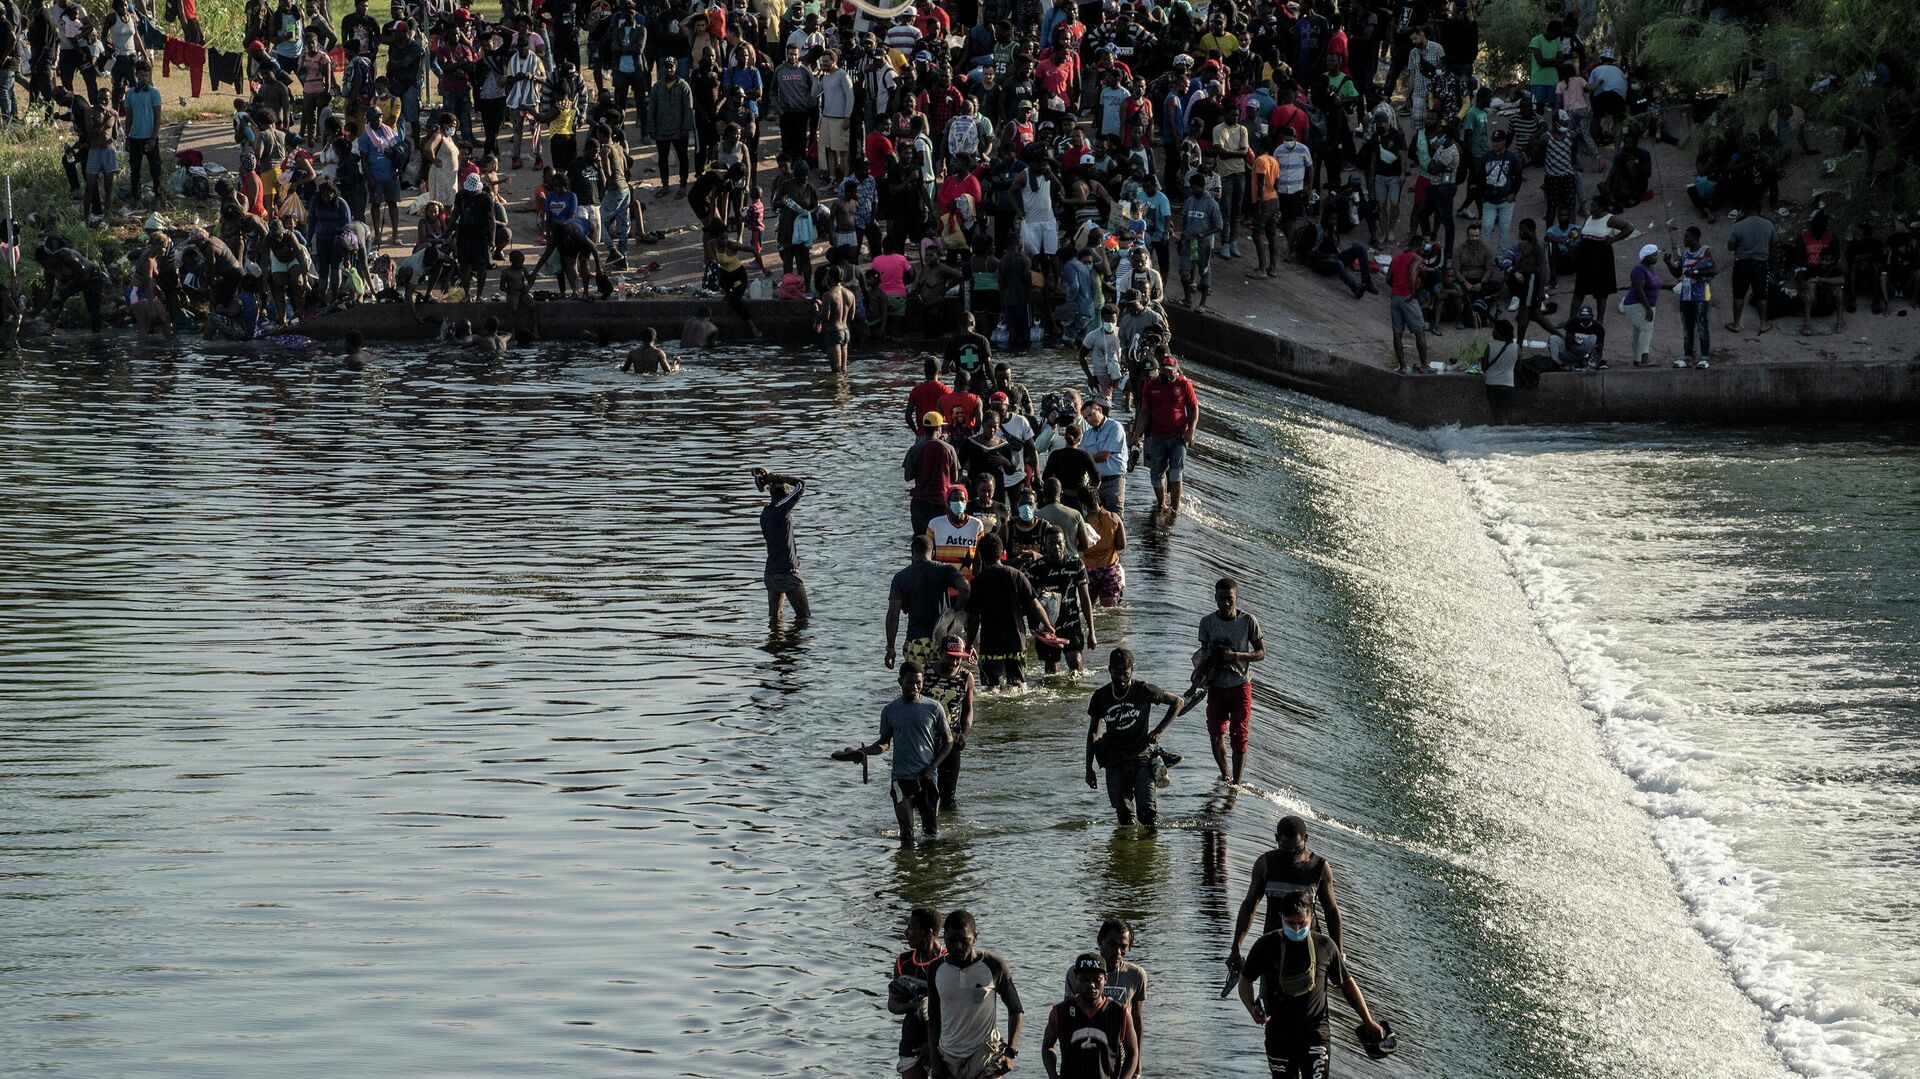 Migrants seeking asylum in the U.S. walk in the Rio Grande river near the International Bridge between Mexico and the U.S., as they wait to be processed, in Ciudad Acuna, Mexico, September 16, 2021 - Sputnik International, 1920, 17.09.2021